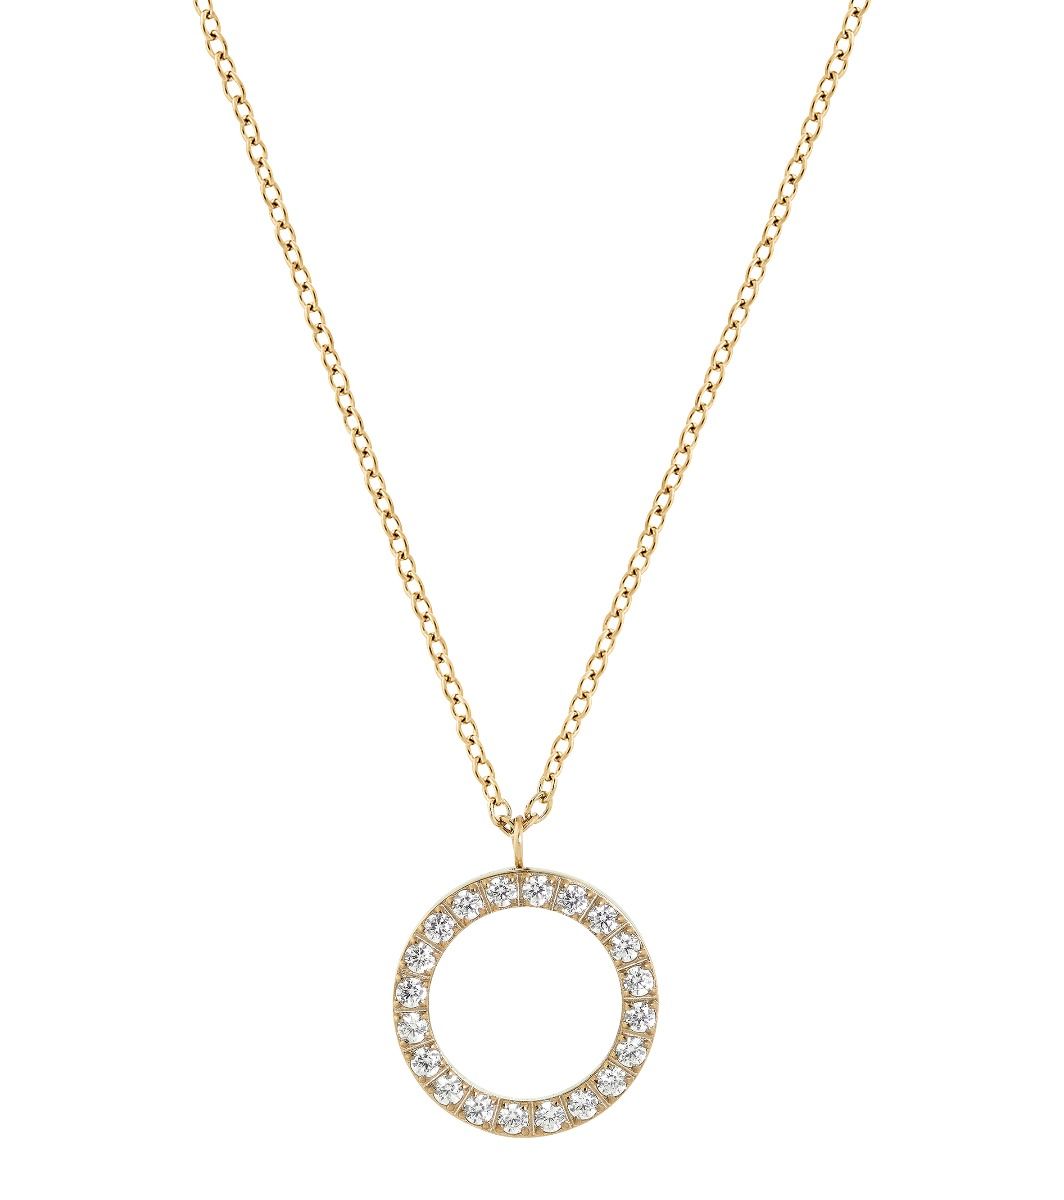 Gold chain with a round pendant covered with 20 sparkly cubic zirconia stones